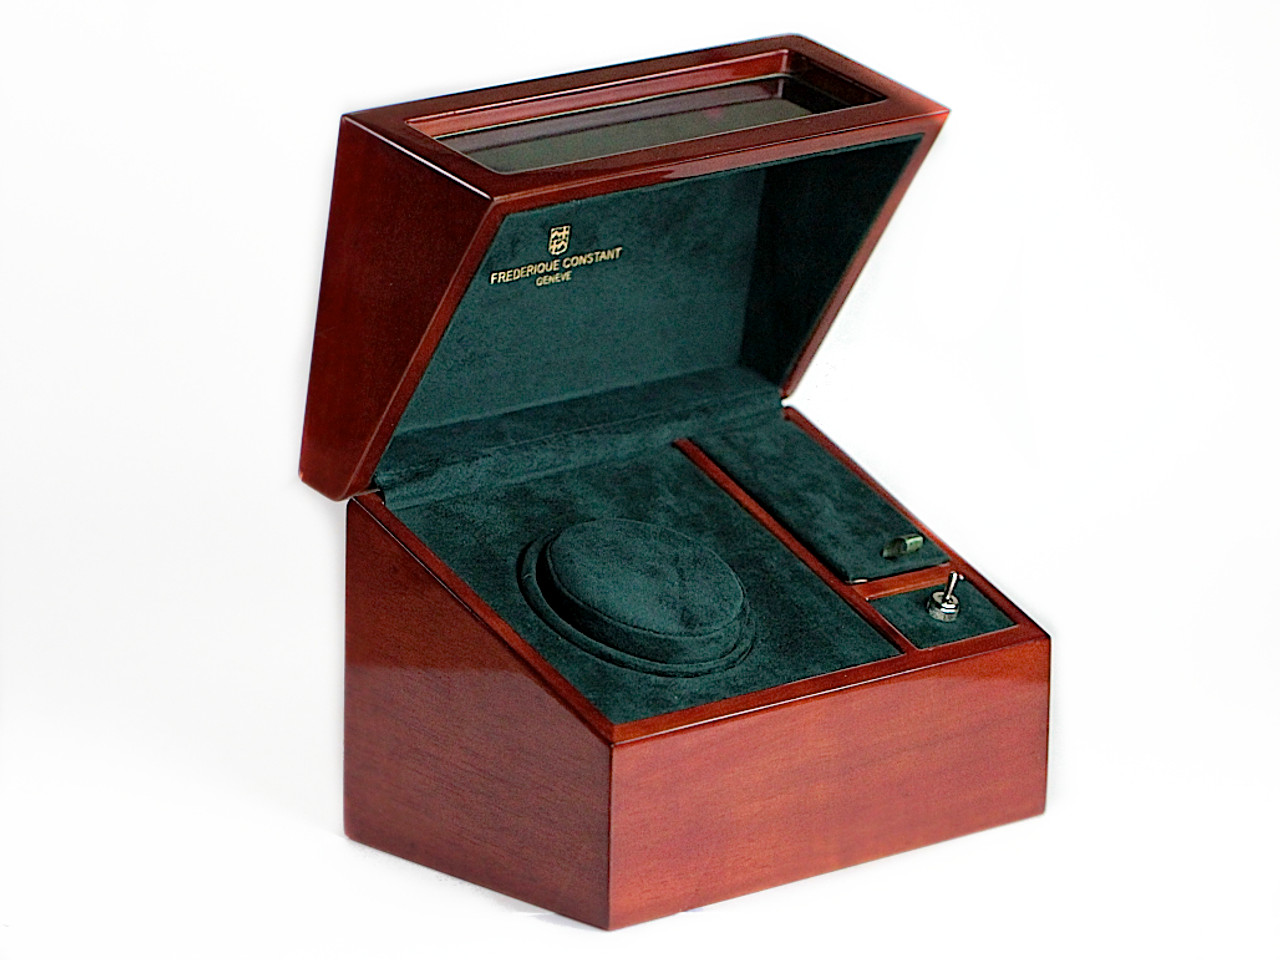 Frederique Constant Watch Winder - Beautiful Deep Cherry Wood for sale  Legend of Time Chicago Watch Center